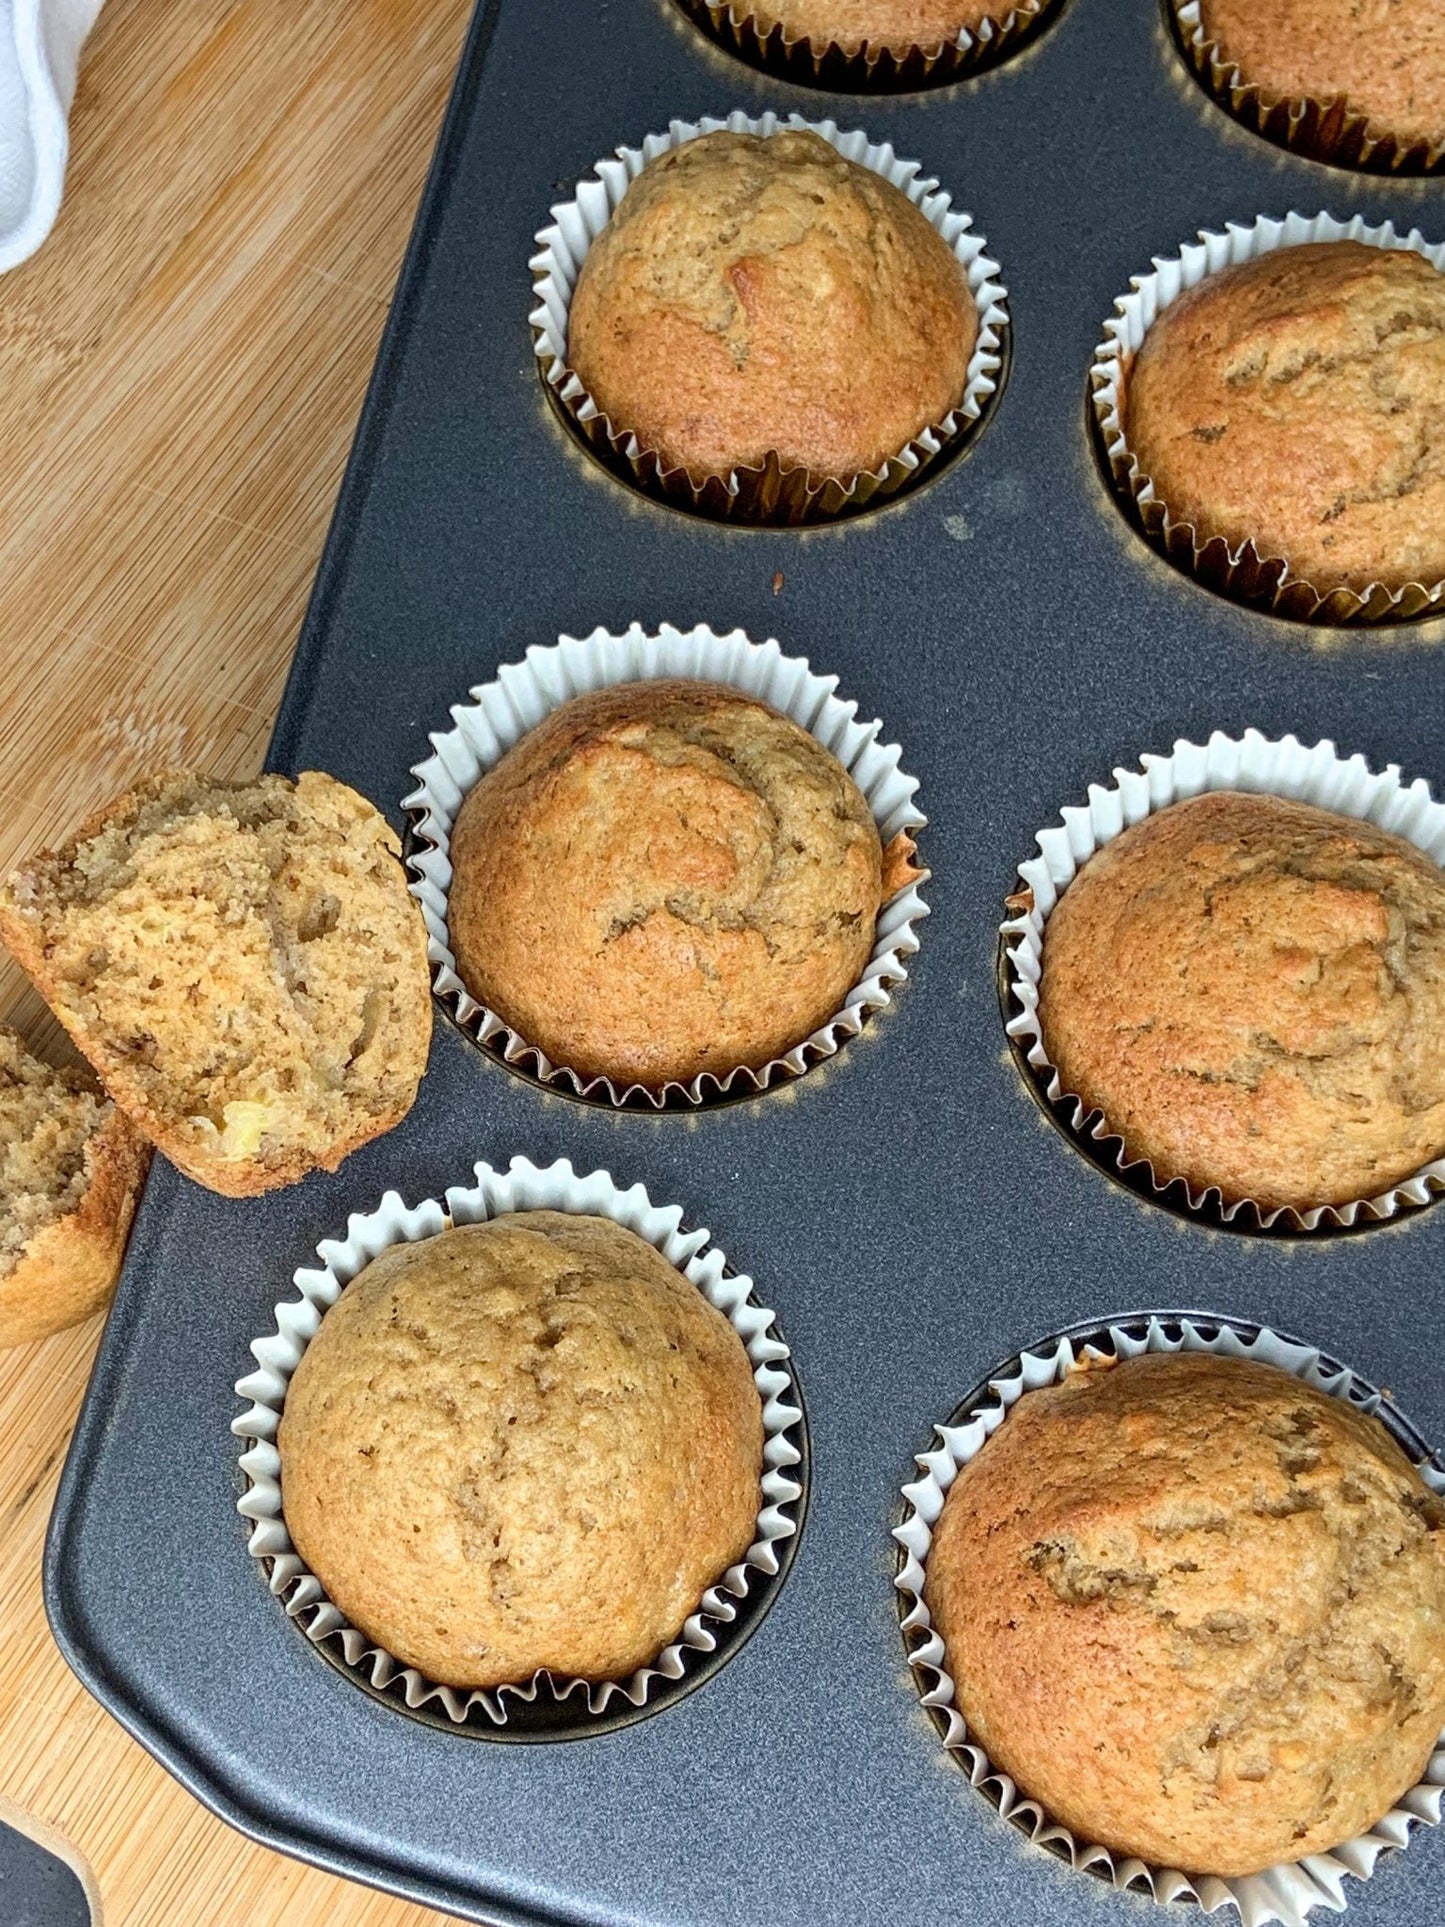 Banana Bread or Muffins Baking Mix - Bake it by Giovannellis